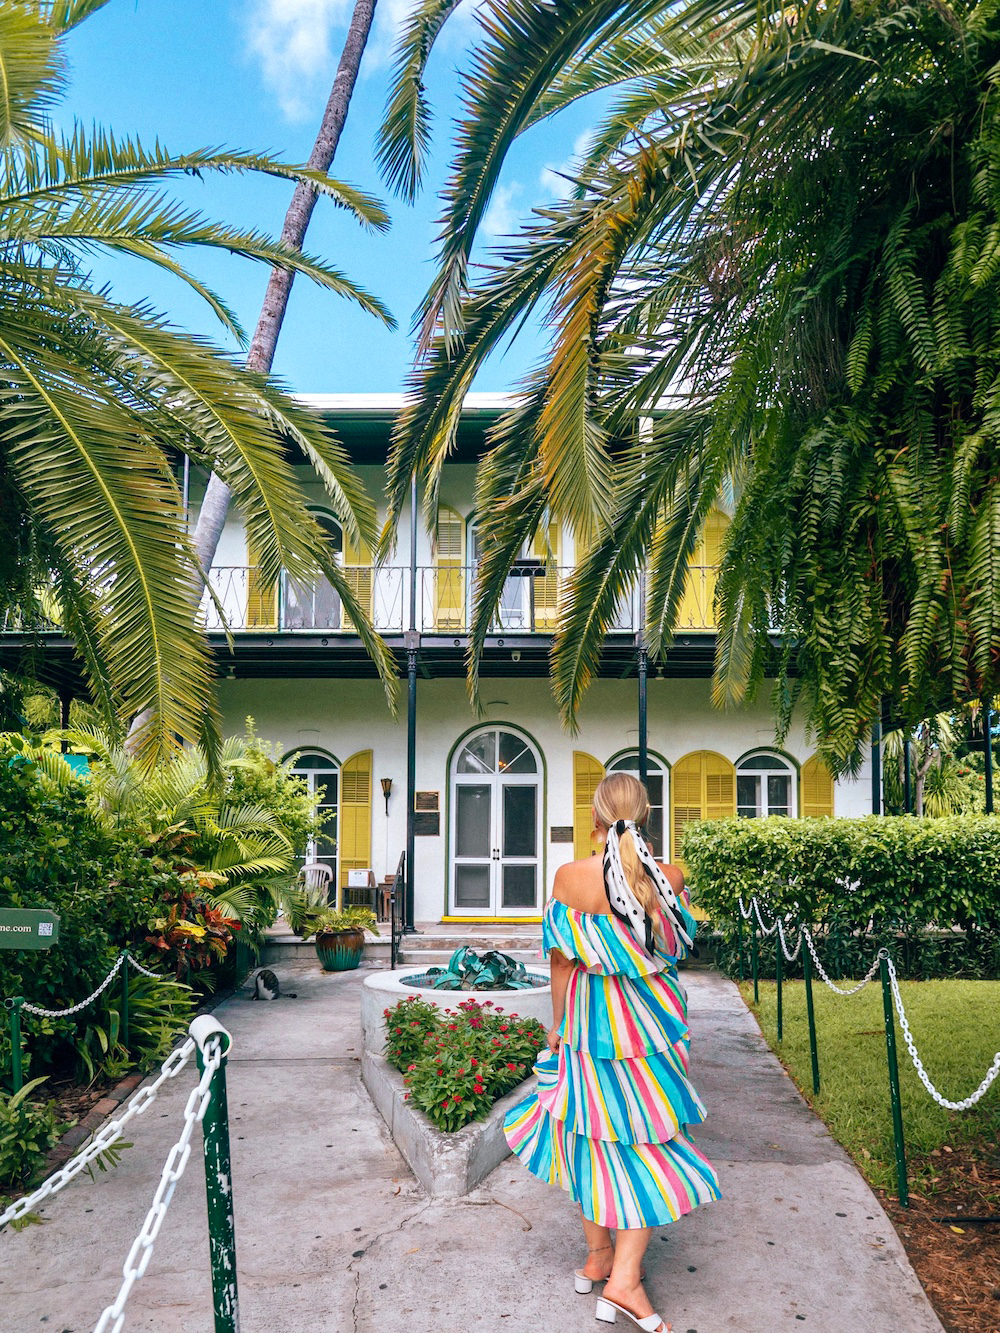 So you've planned a wonderful 4 day trip to Miami and now you're looking for the perfect itinerary for your visit… well, this guide is for you! I’ve put together the ultimate 4 days in Miami itinerary that will have you seeing and experiencing all of Miami’s top sights and attractions. From South Beach to Little Havana, the Wynwood Arts District to the Everglades, and even a day trip to Key West! This really is the perfect 4 day itinerary to get the most out of your time in Miami. Pictured here: Day trip to Key West